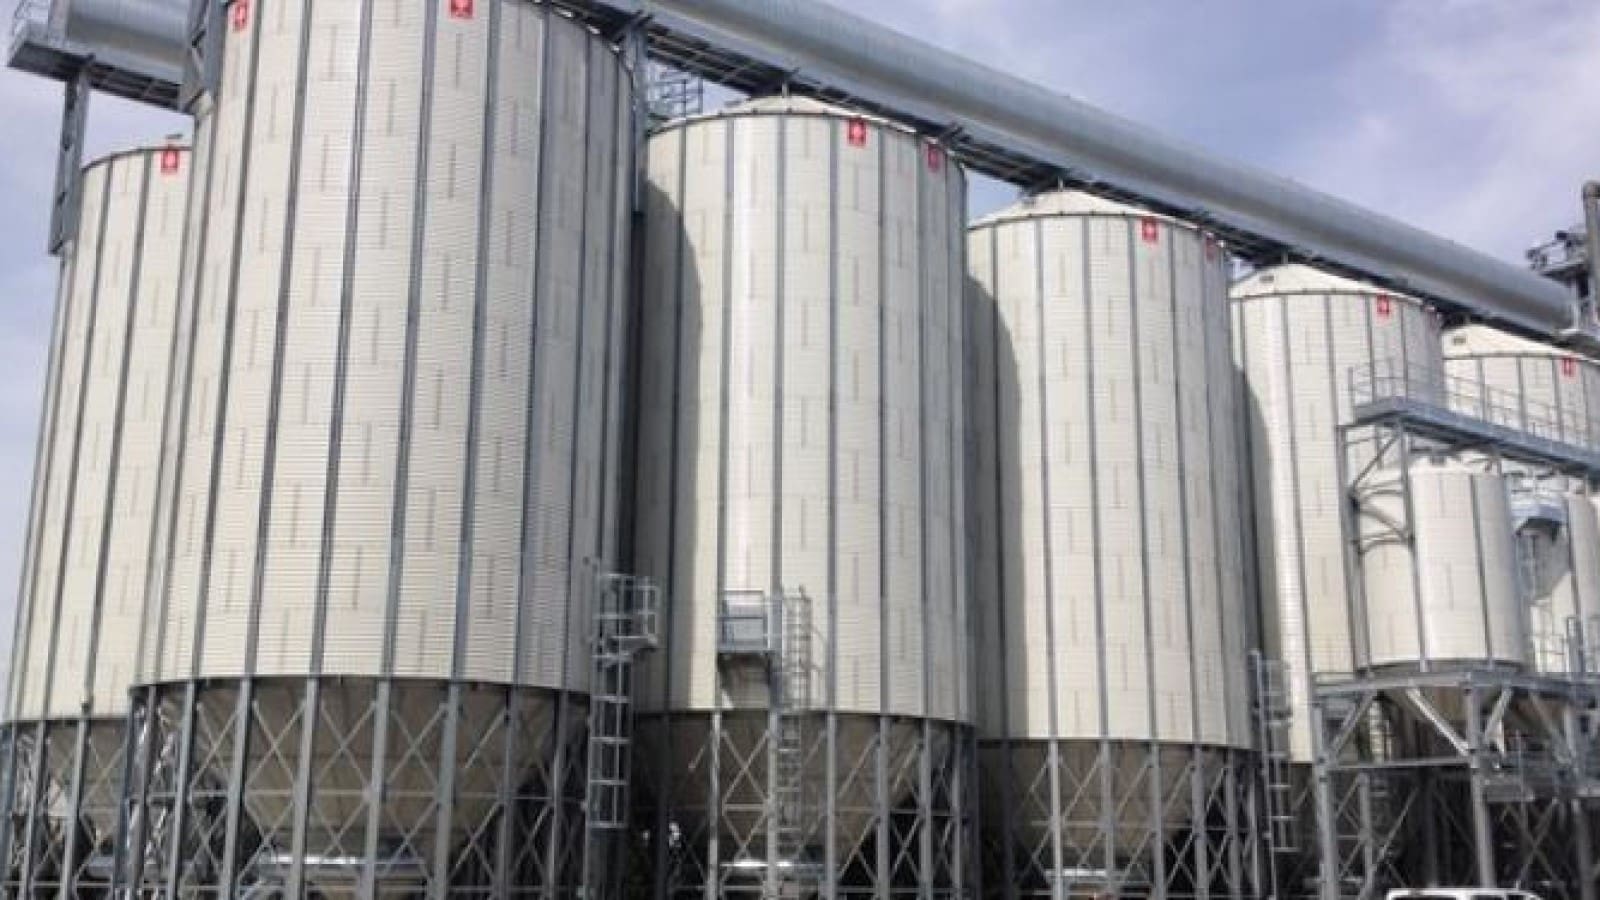 Iraq to build 4 silos, 17 bunkers to expand grain storage capacity